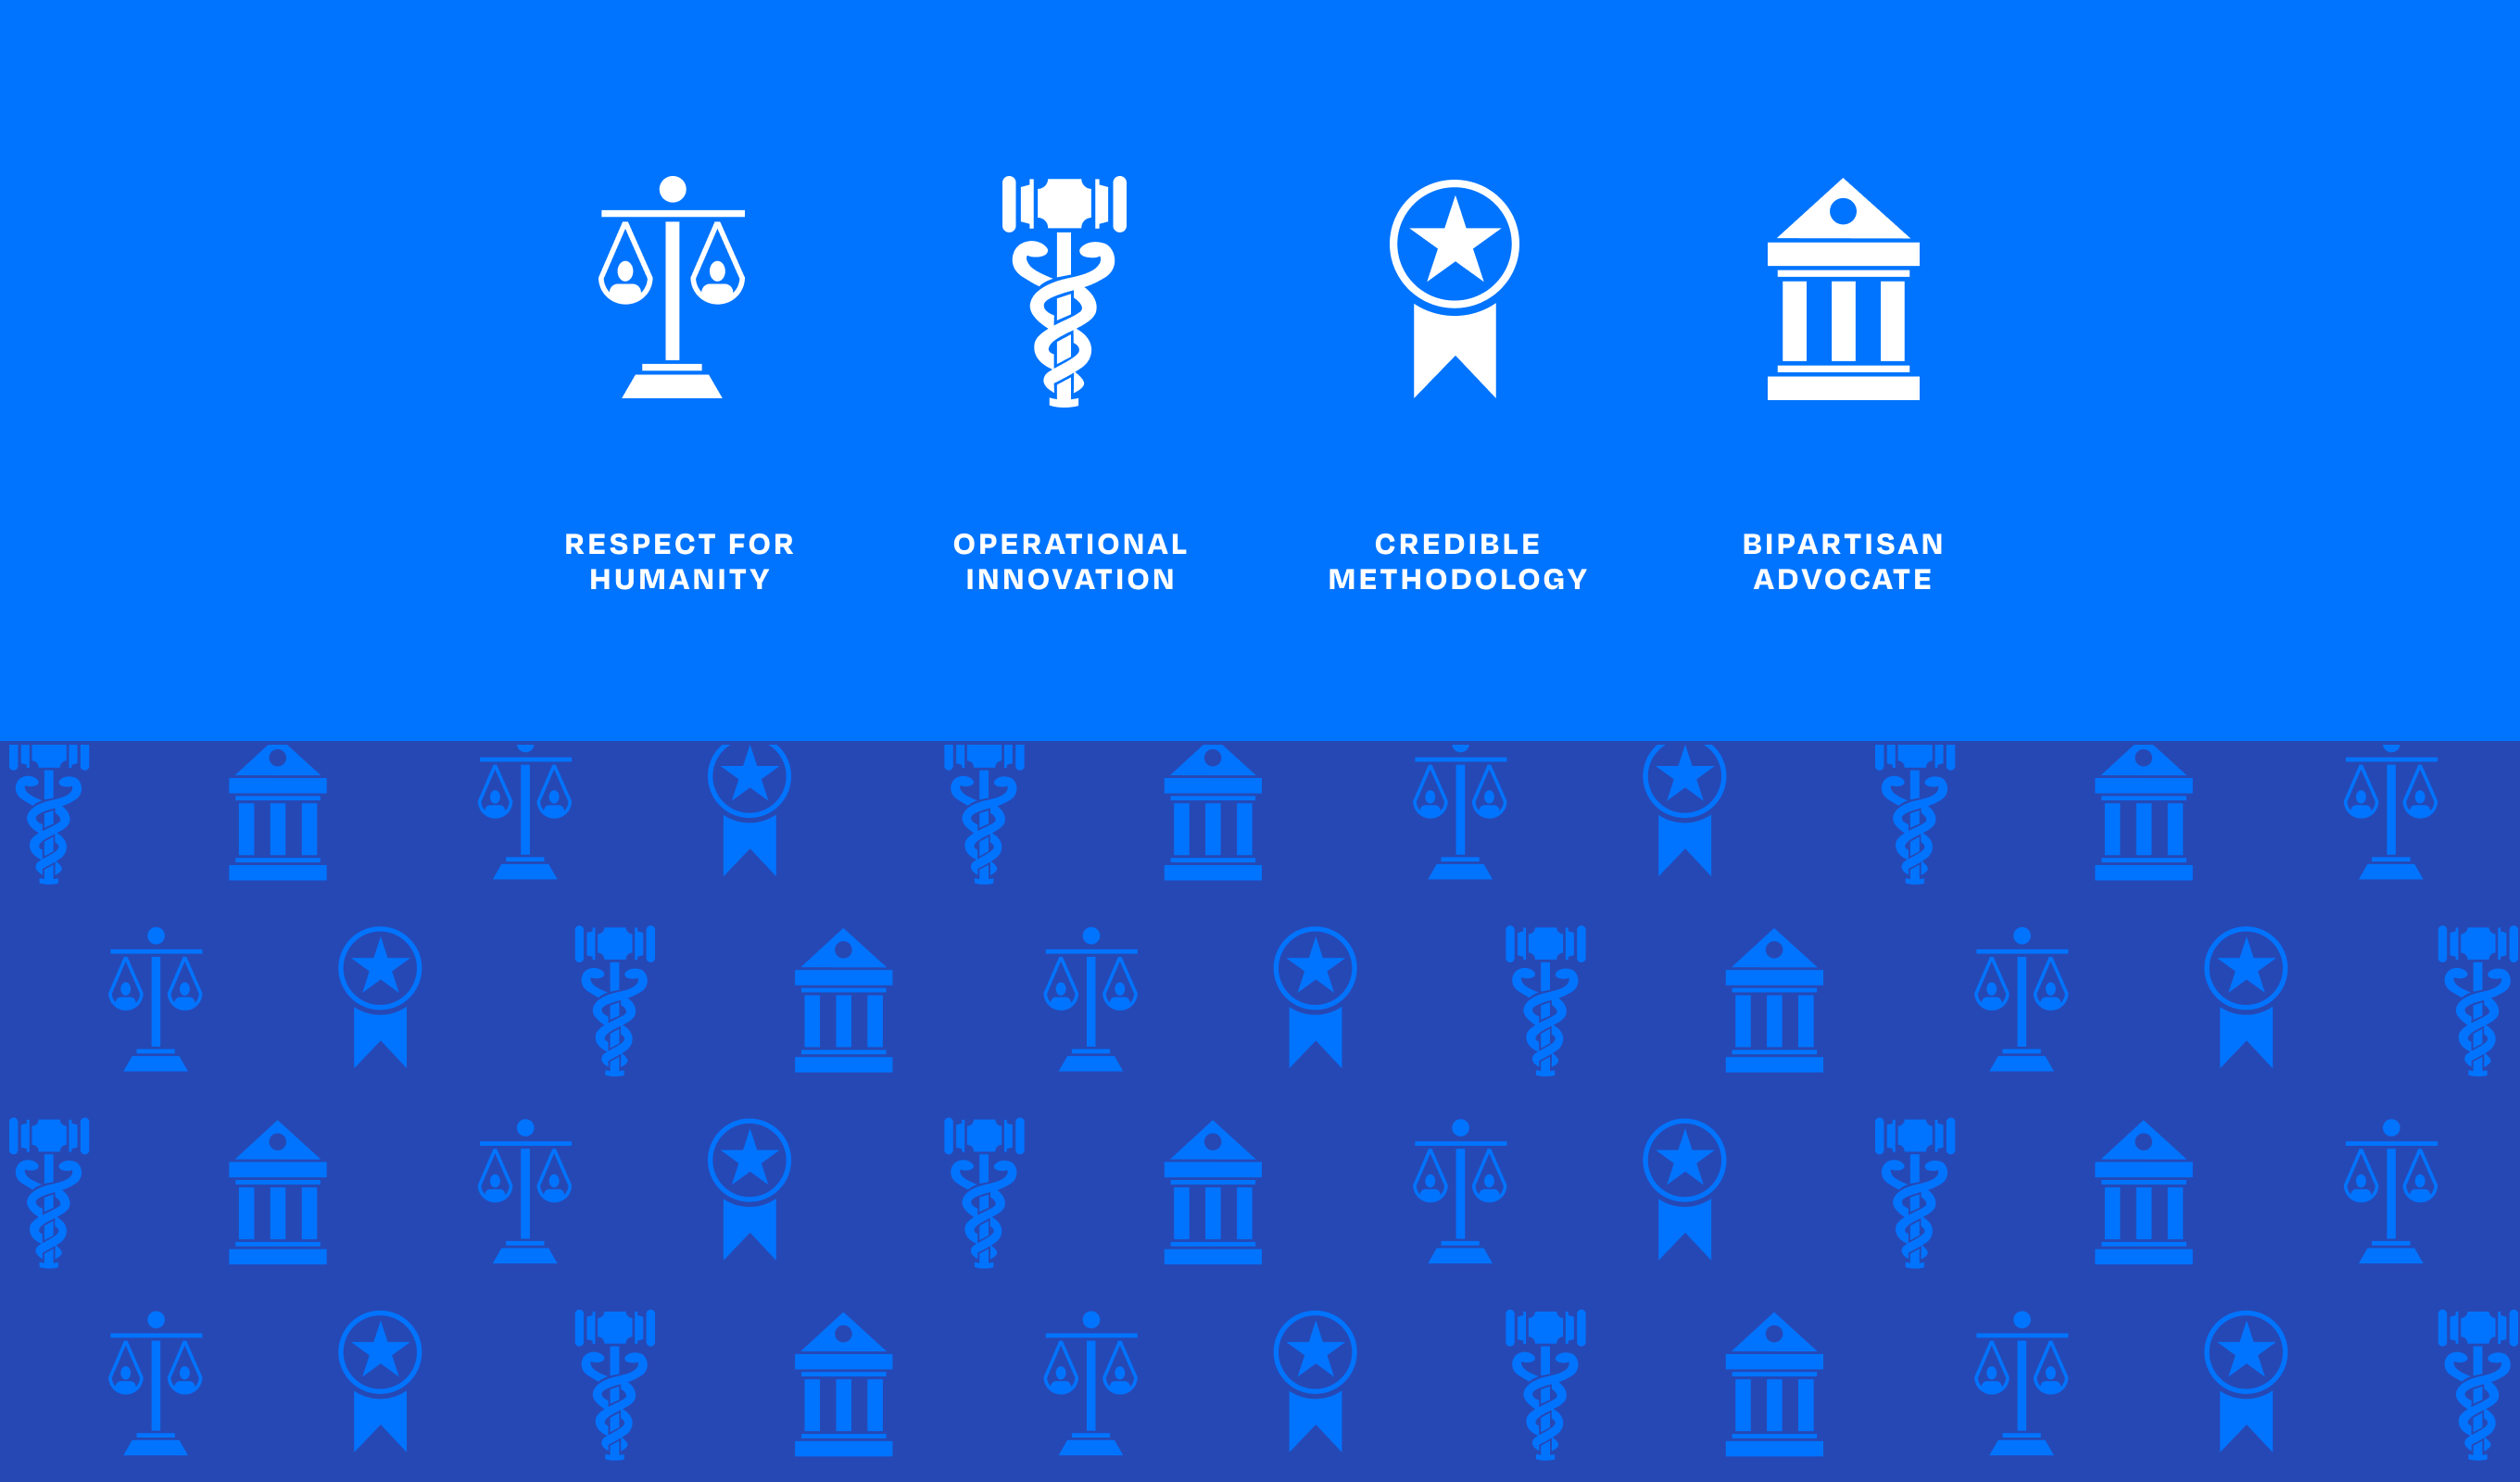 Custom icons showcasing All Rise's core pillars: respect for humanity, operational innovation, credible methodology, and bipartisan advocate.